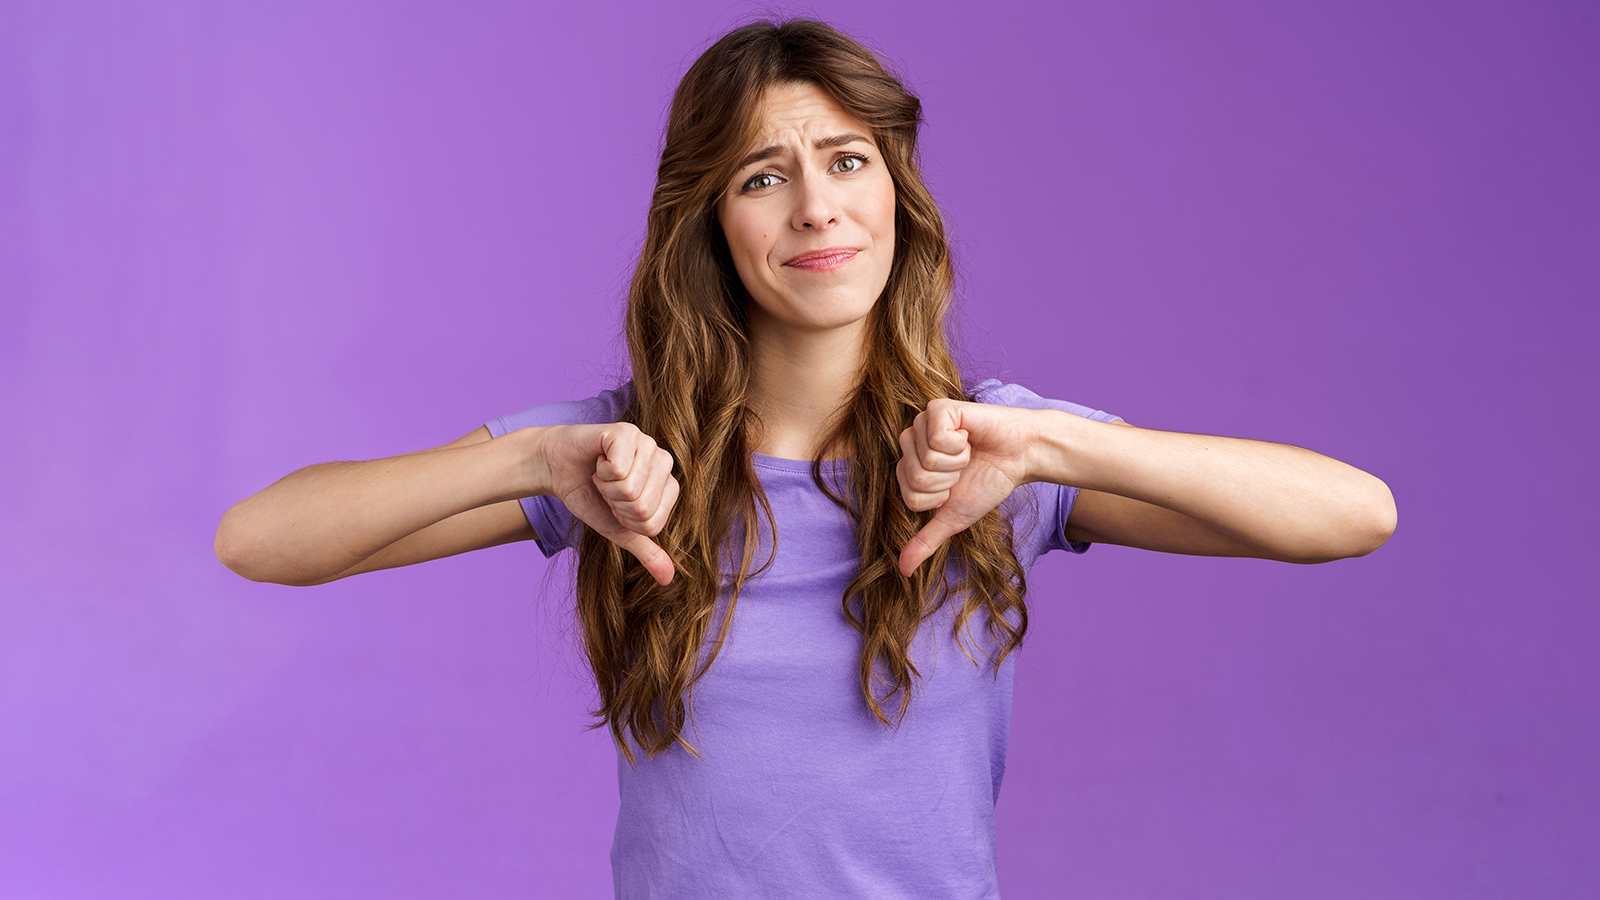 Disappointed displeased pity girl show thumbs down grimace dislike express negative opinion thumbs down gesture apologizing giving bad feedback stand purple background unimpressed.